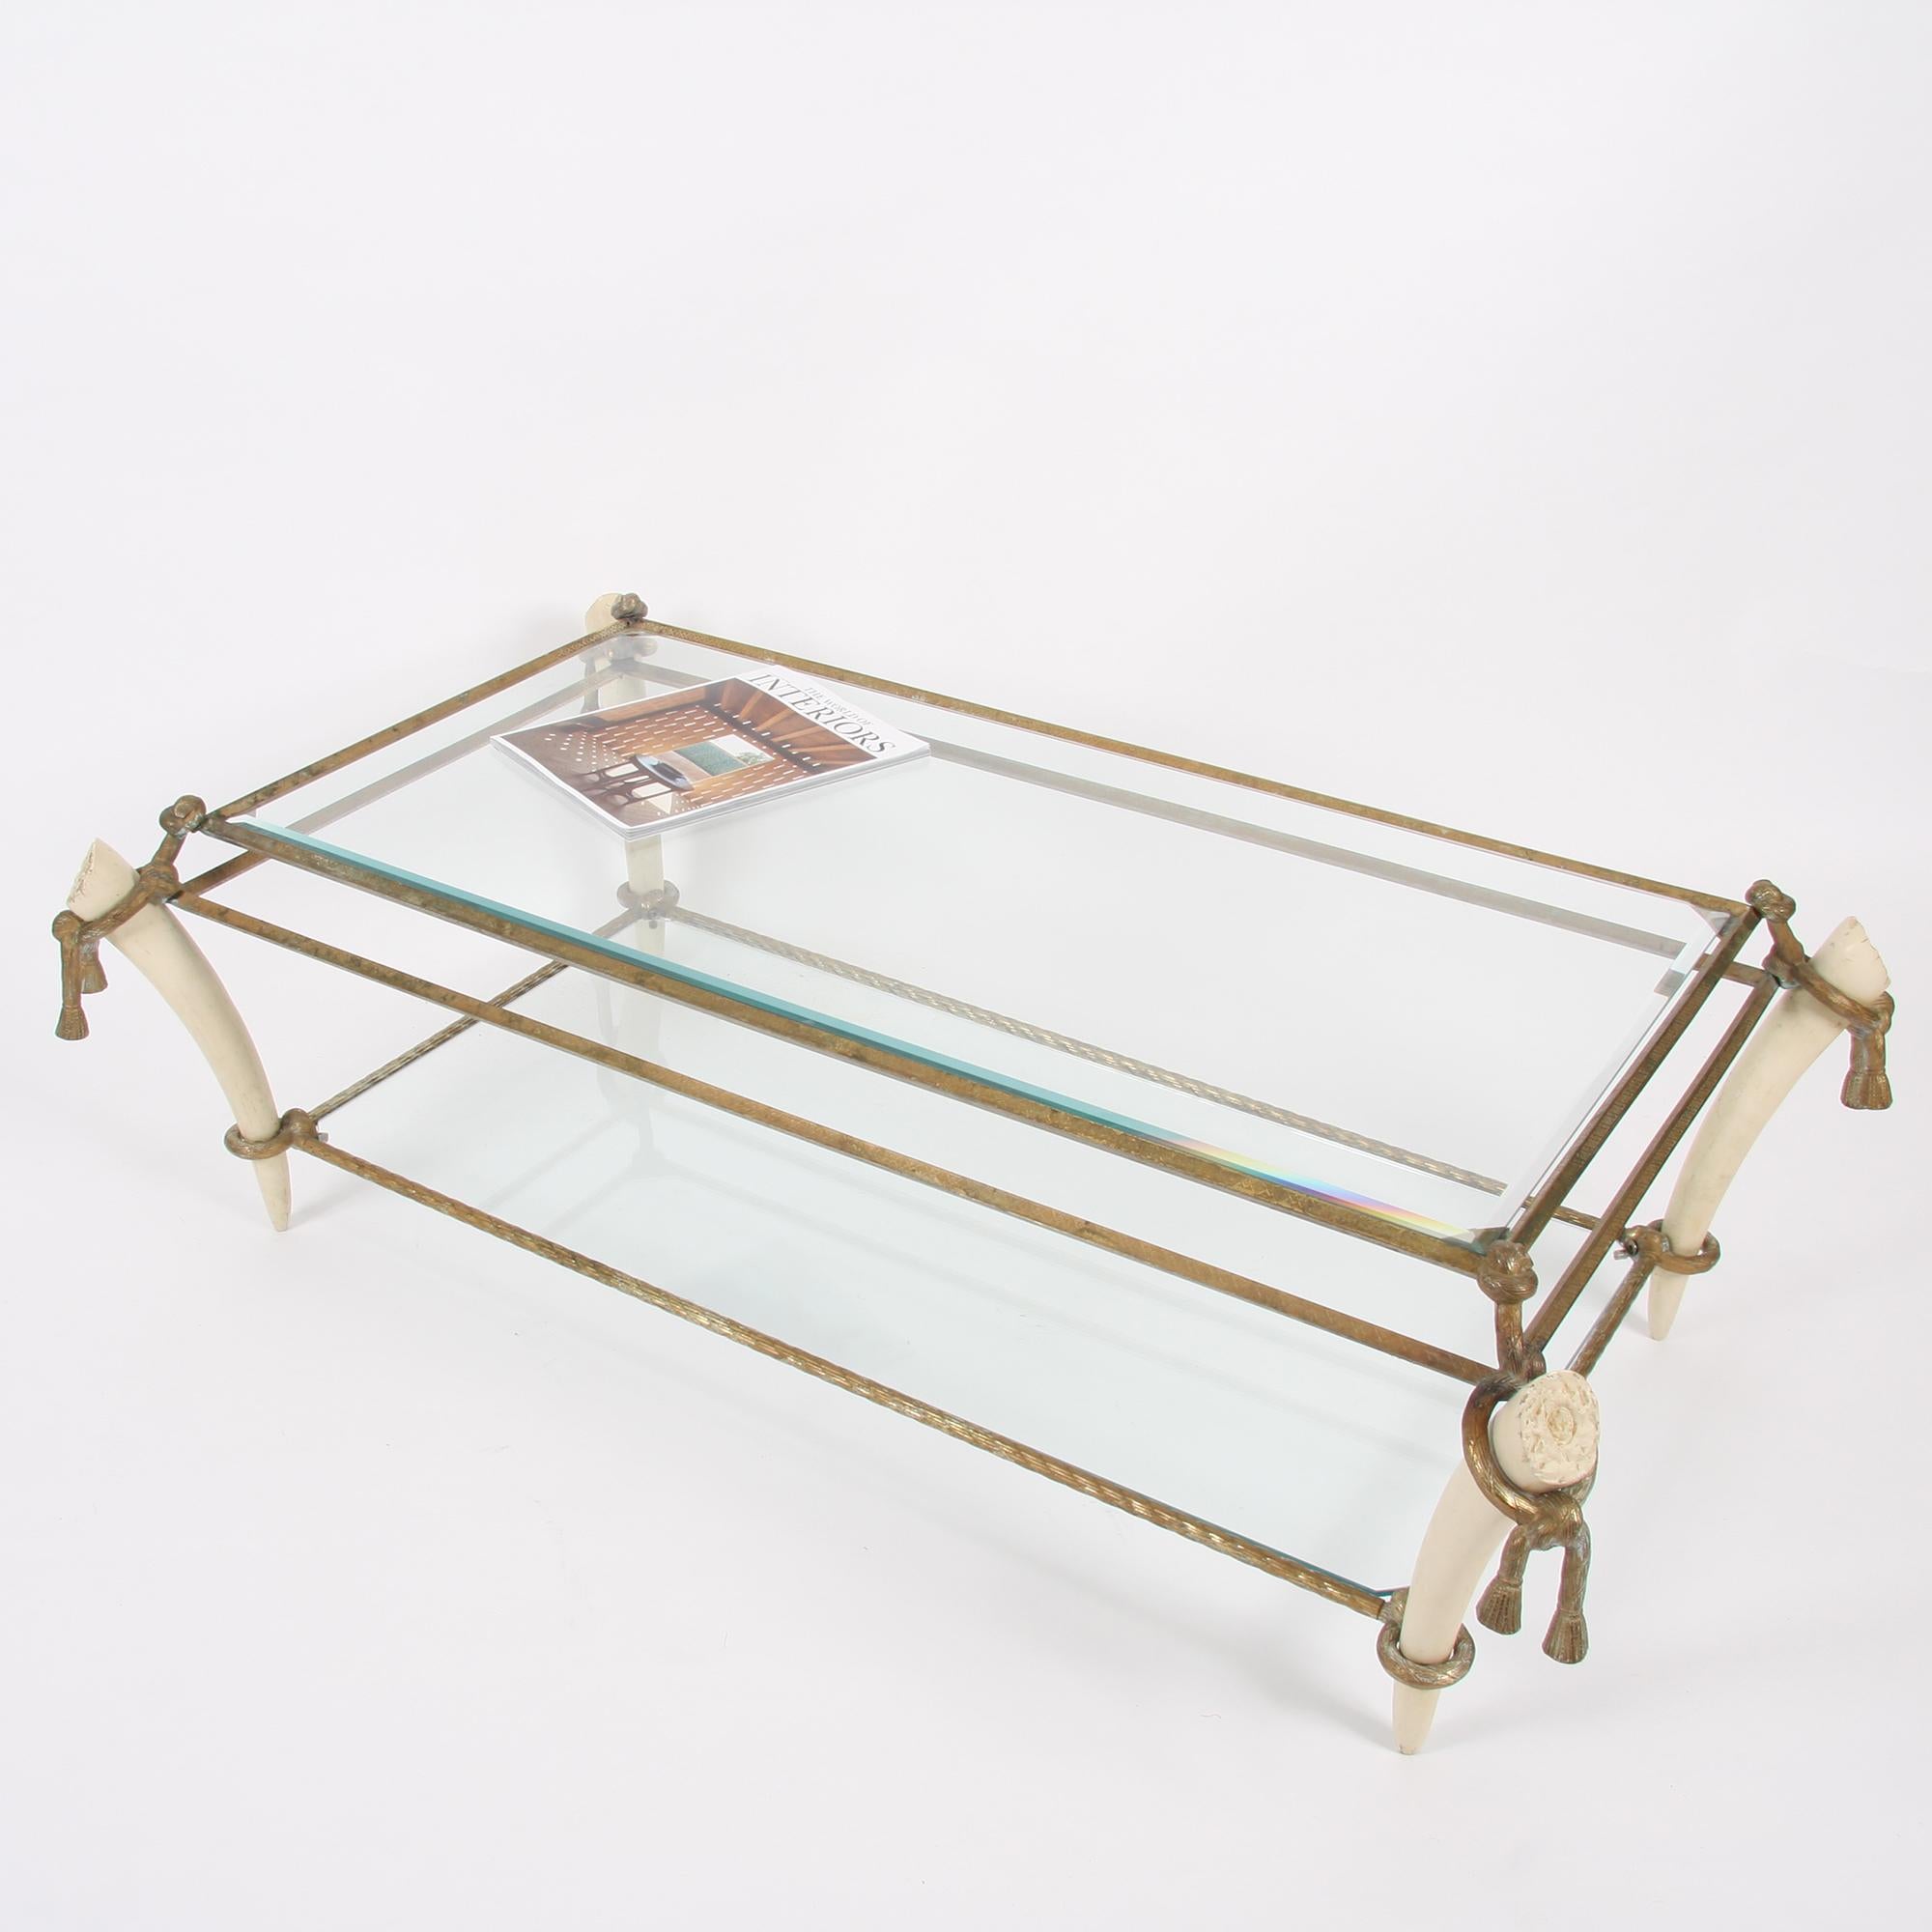 This elegant, exquisitely detailed two-tiered glass and brass table with faux ivory legs dates back to 1930s, France.